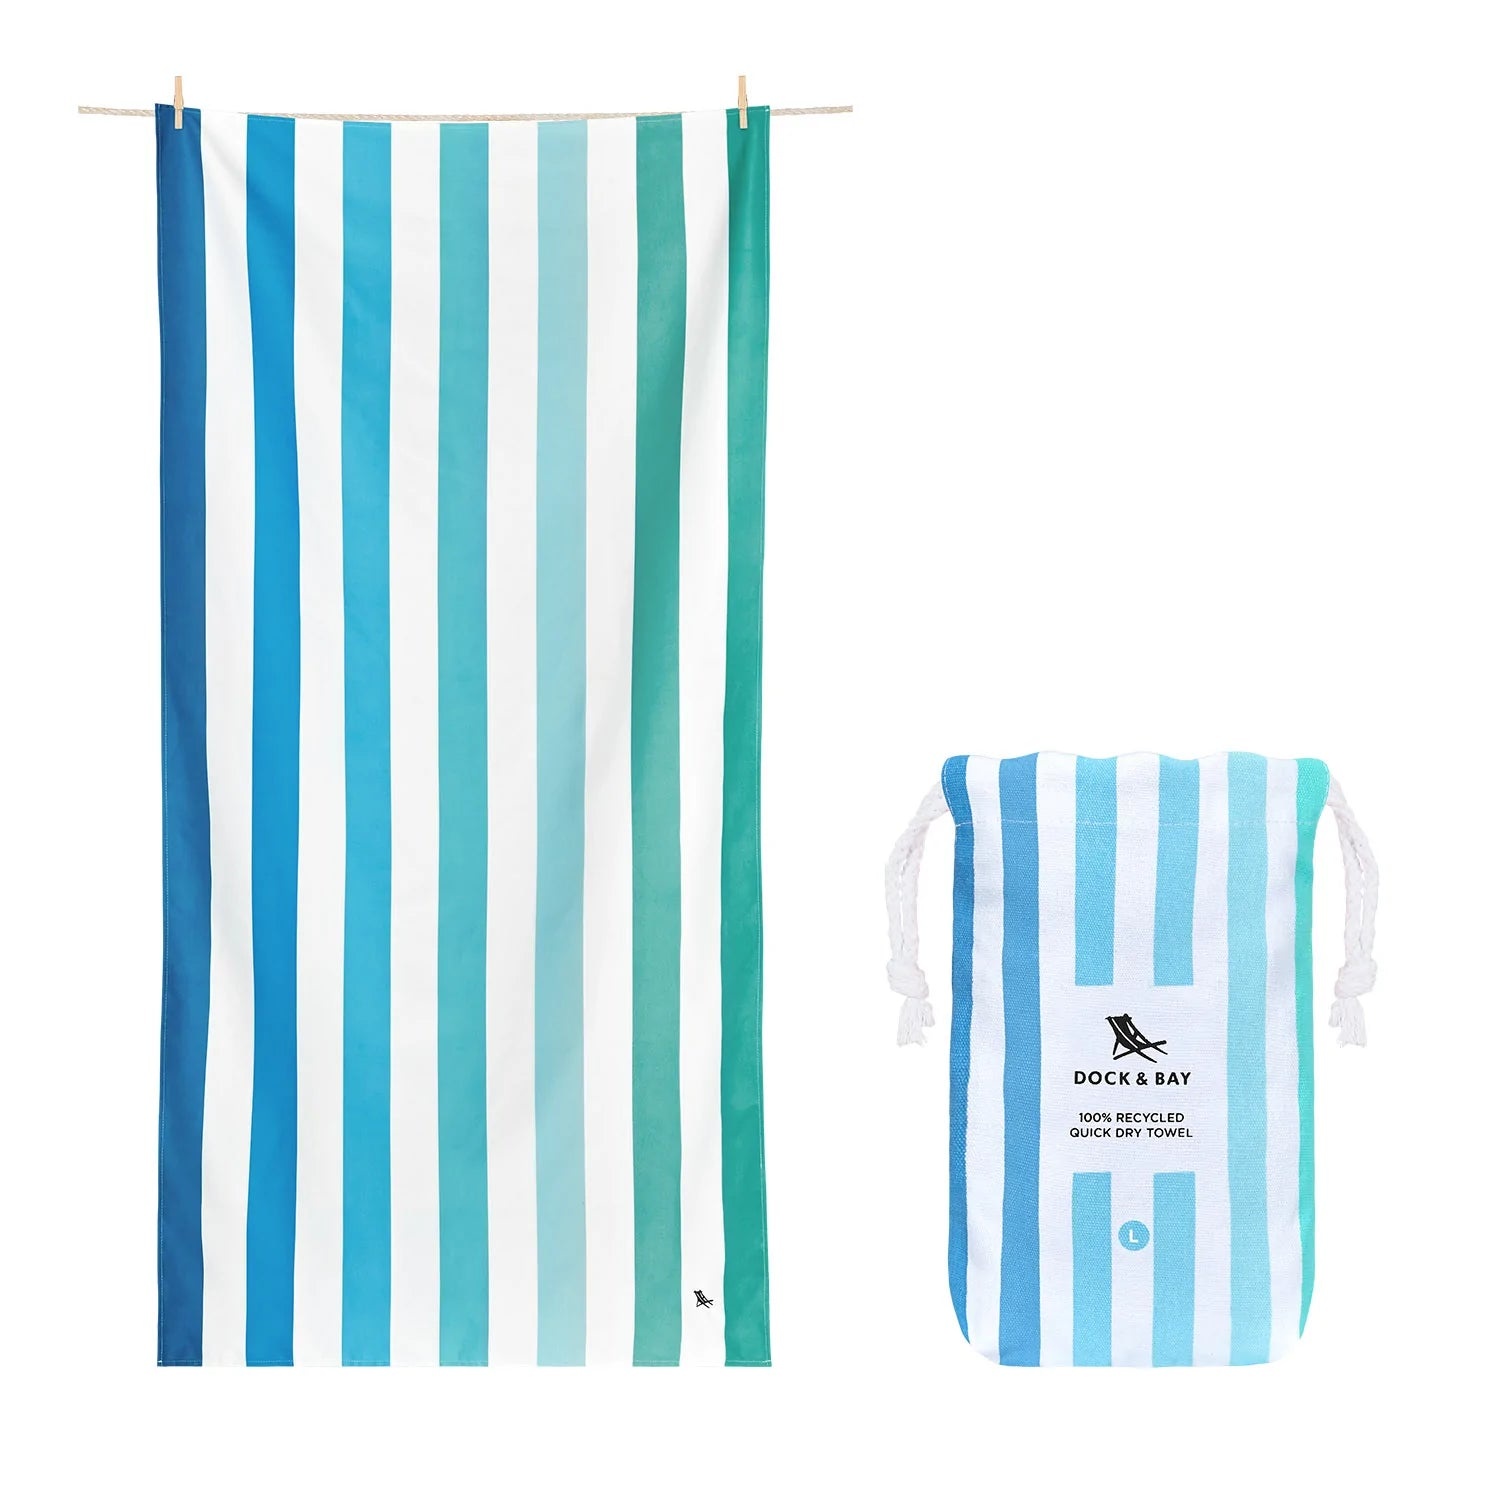 Dock & Bay Large Quick Dry Towels